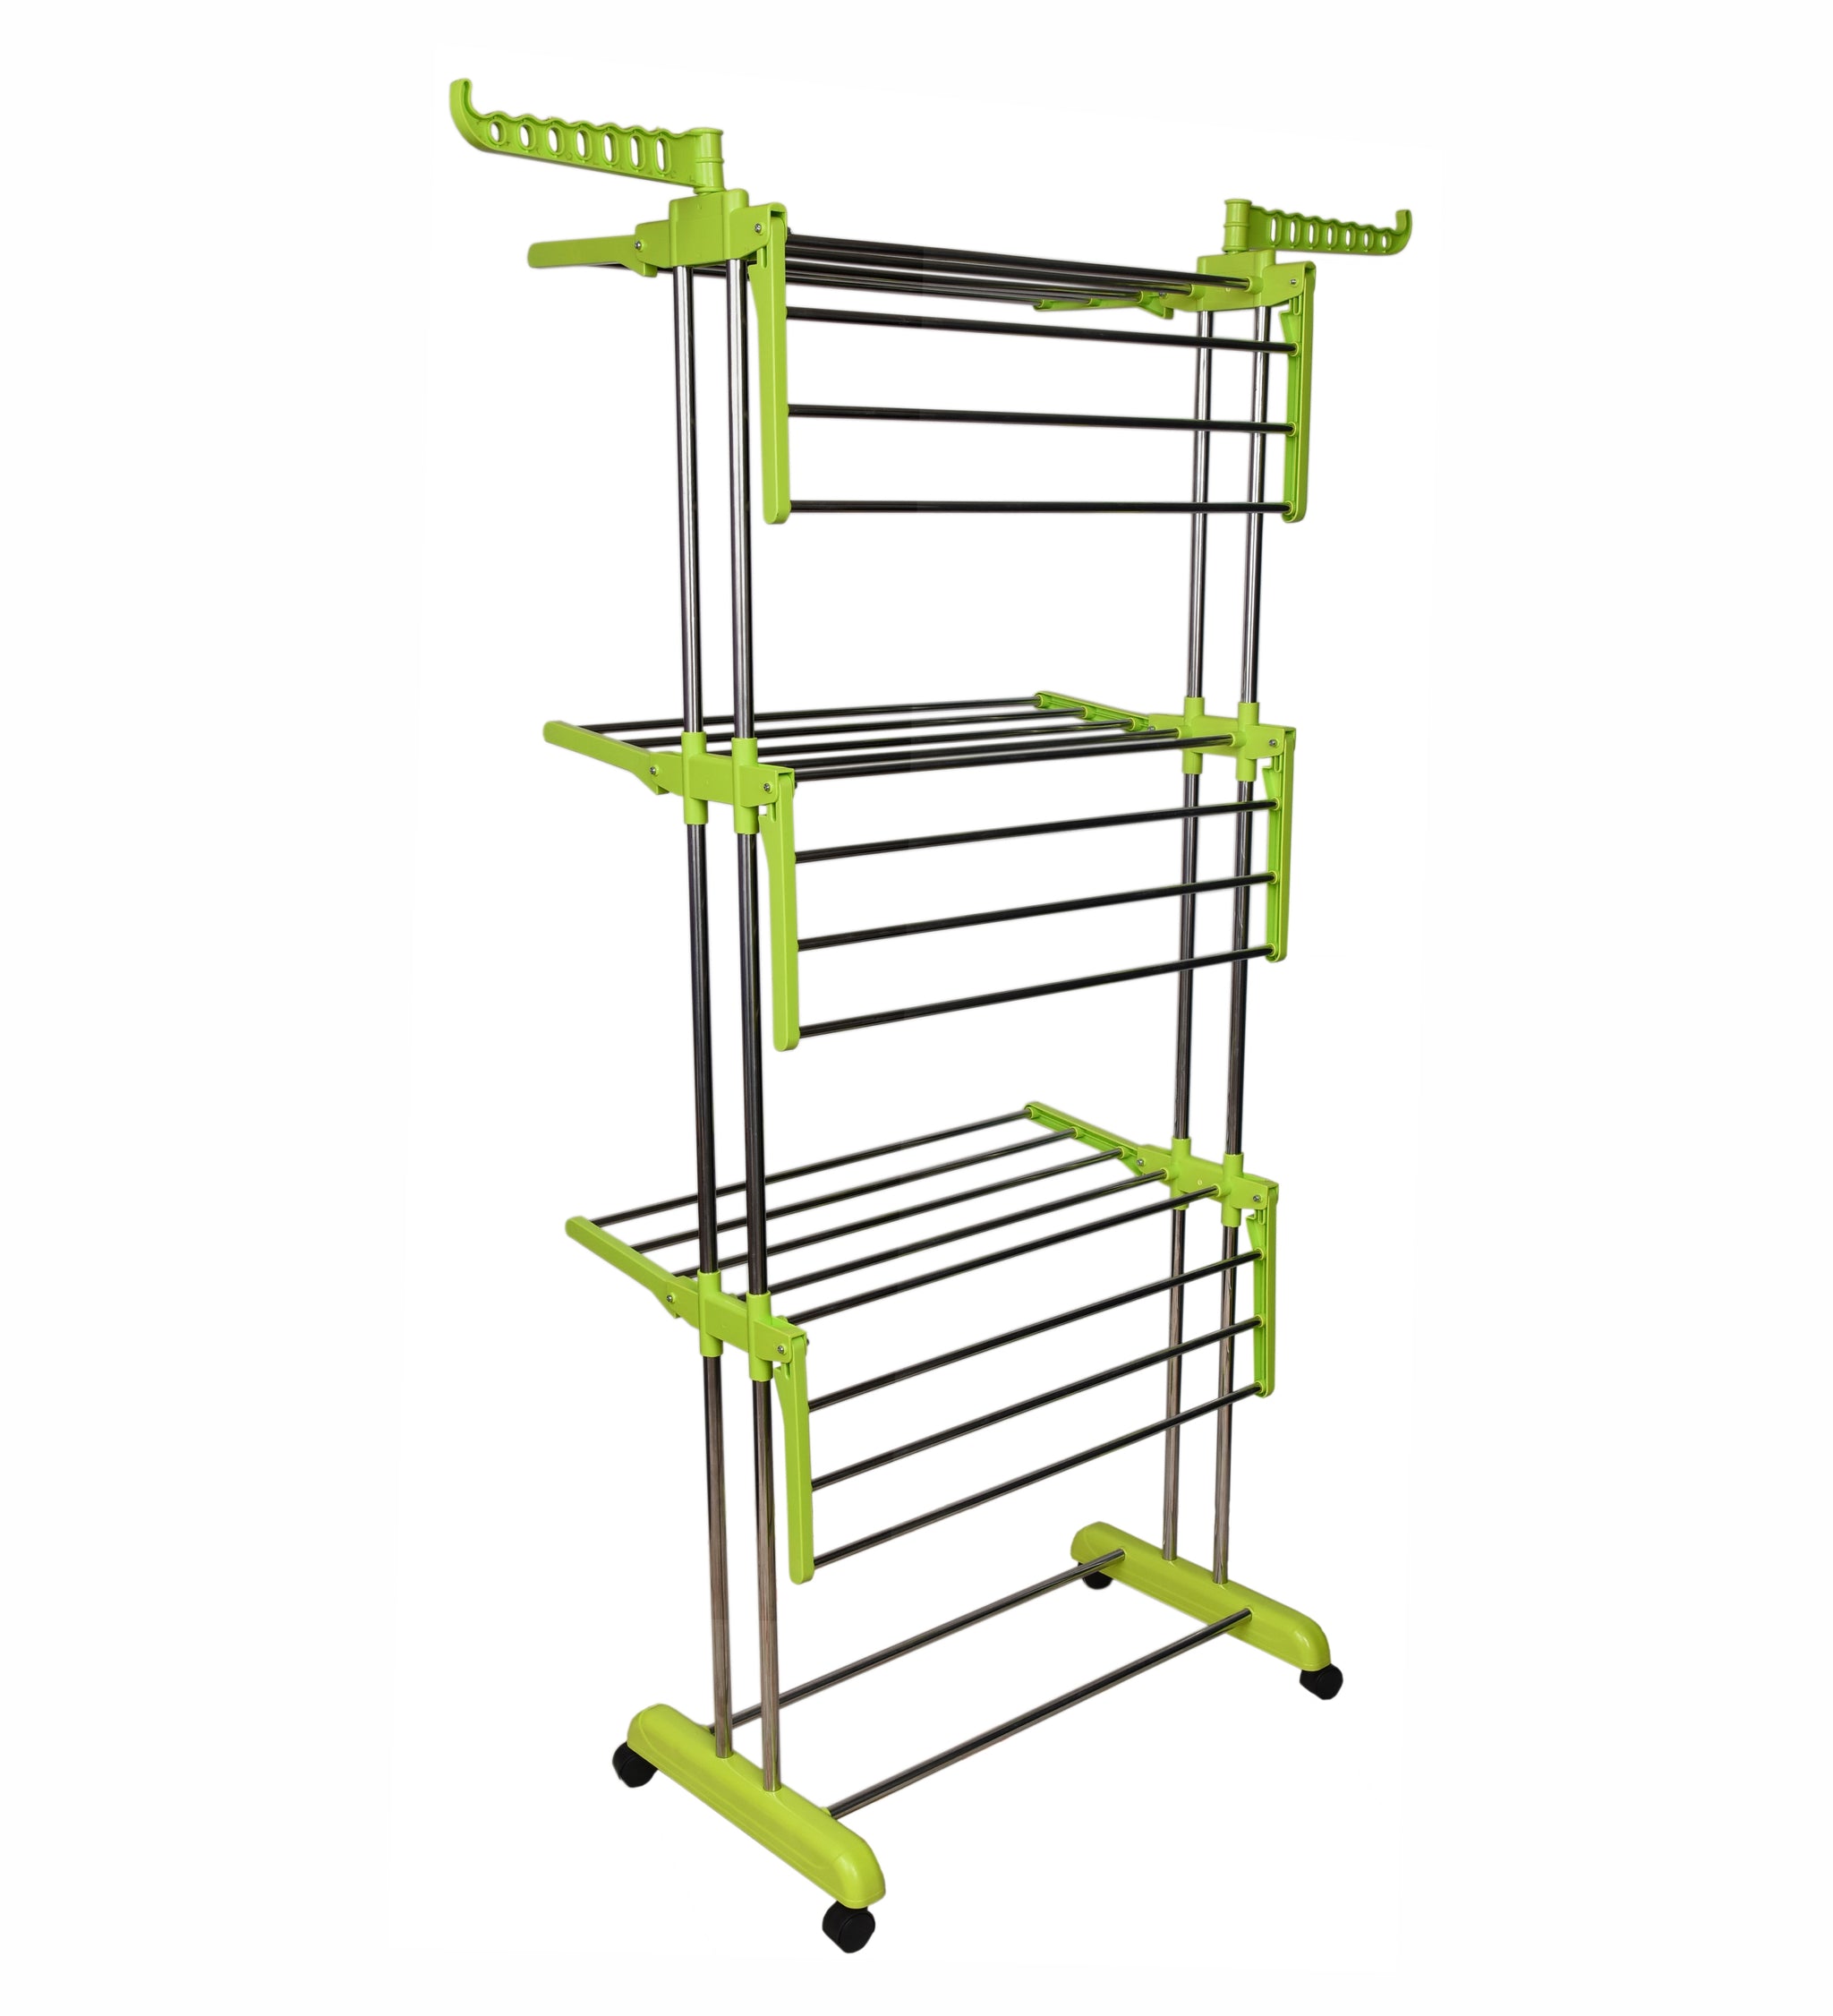 Products LivingBasics Stainless Steel Double Pole Foldable Clothes Drying Stand/Cloth Dryer Stands/Laundry Dry Rack with Wheels for Indoor/Outdoor/Balcony (Lime Green ) (ABS Plastic)